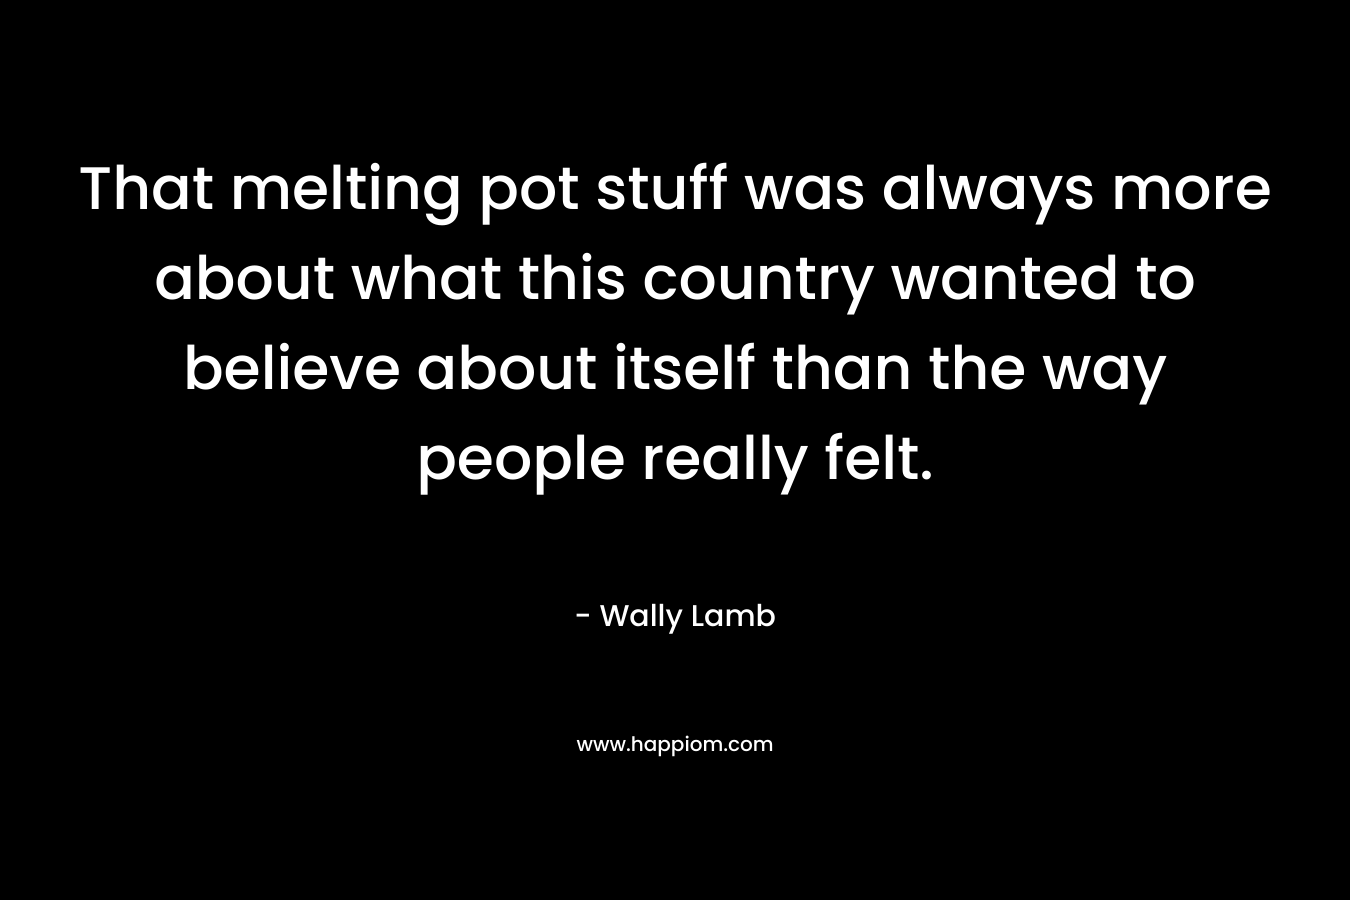 That melting pot stuff was always more about what this country wanted to believe about itself than the way people really felt. – Wally Lamb